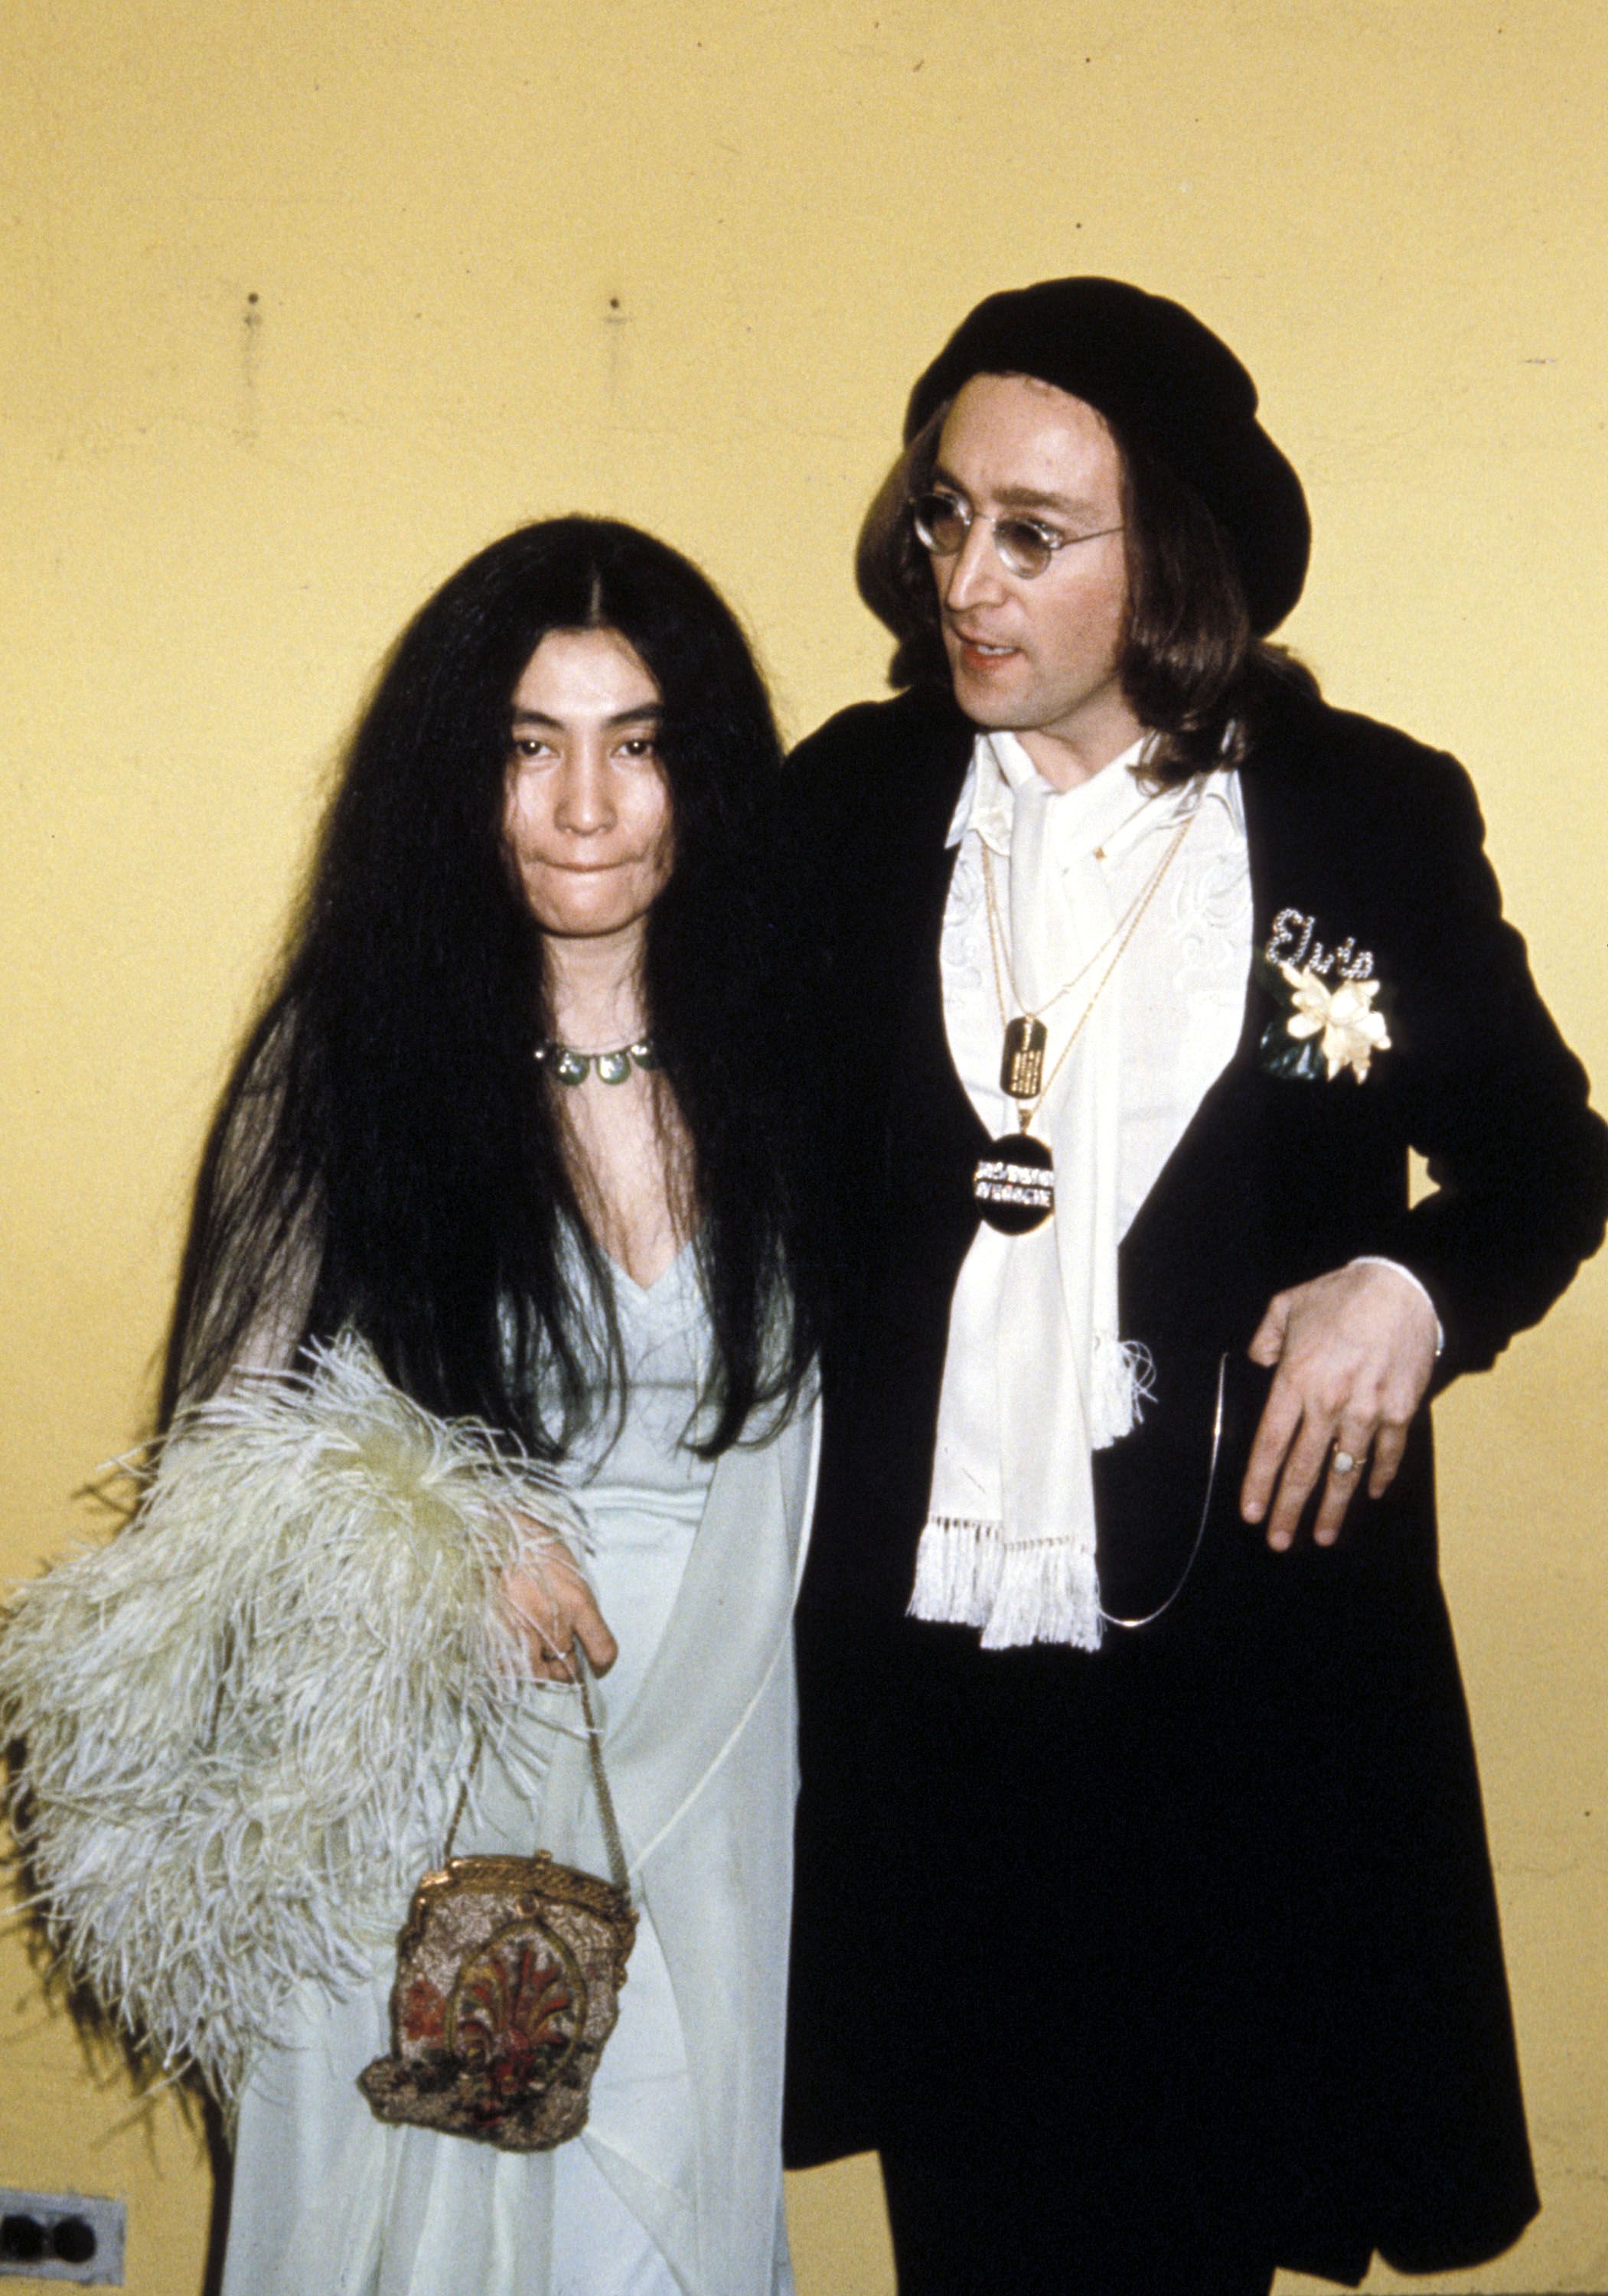 Yoko Ono and John Lennon at the 17th Annual GRAMMY Awards. | Source: Getty Images